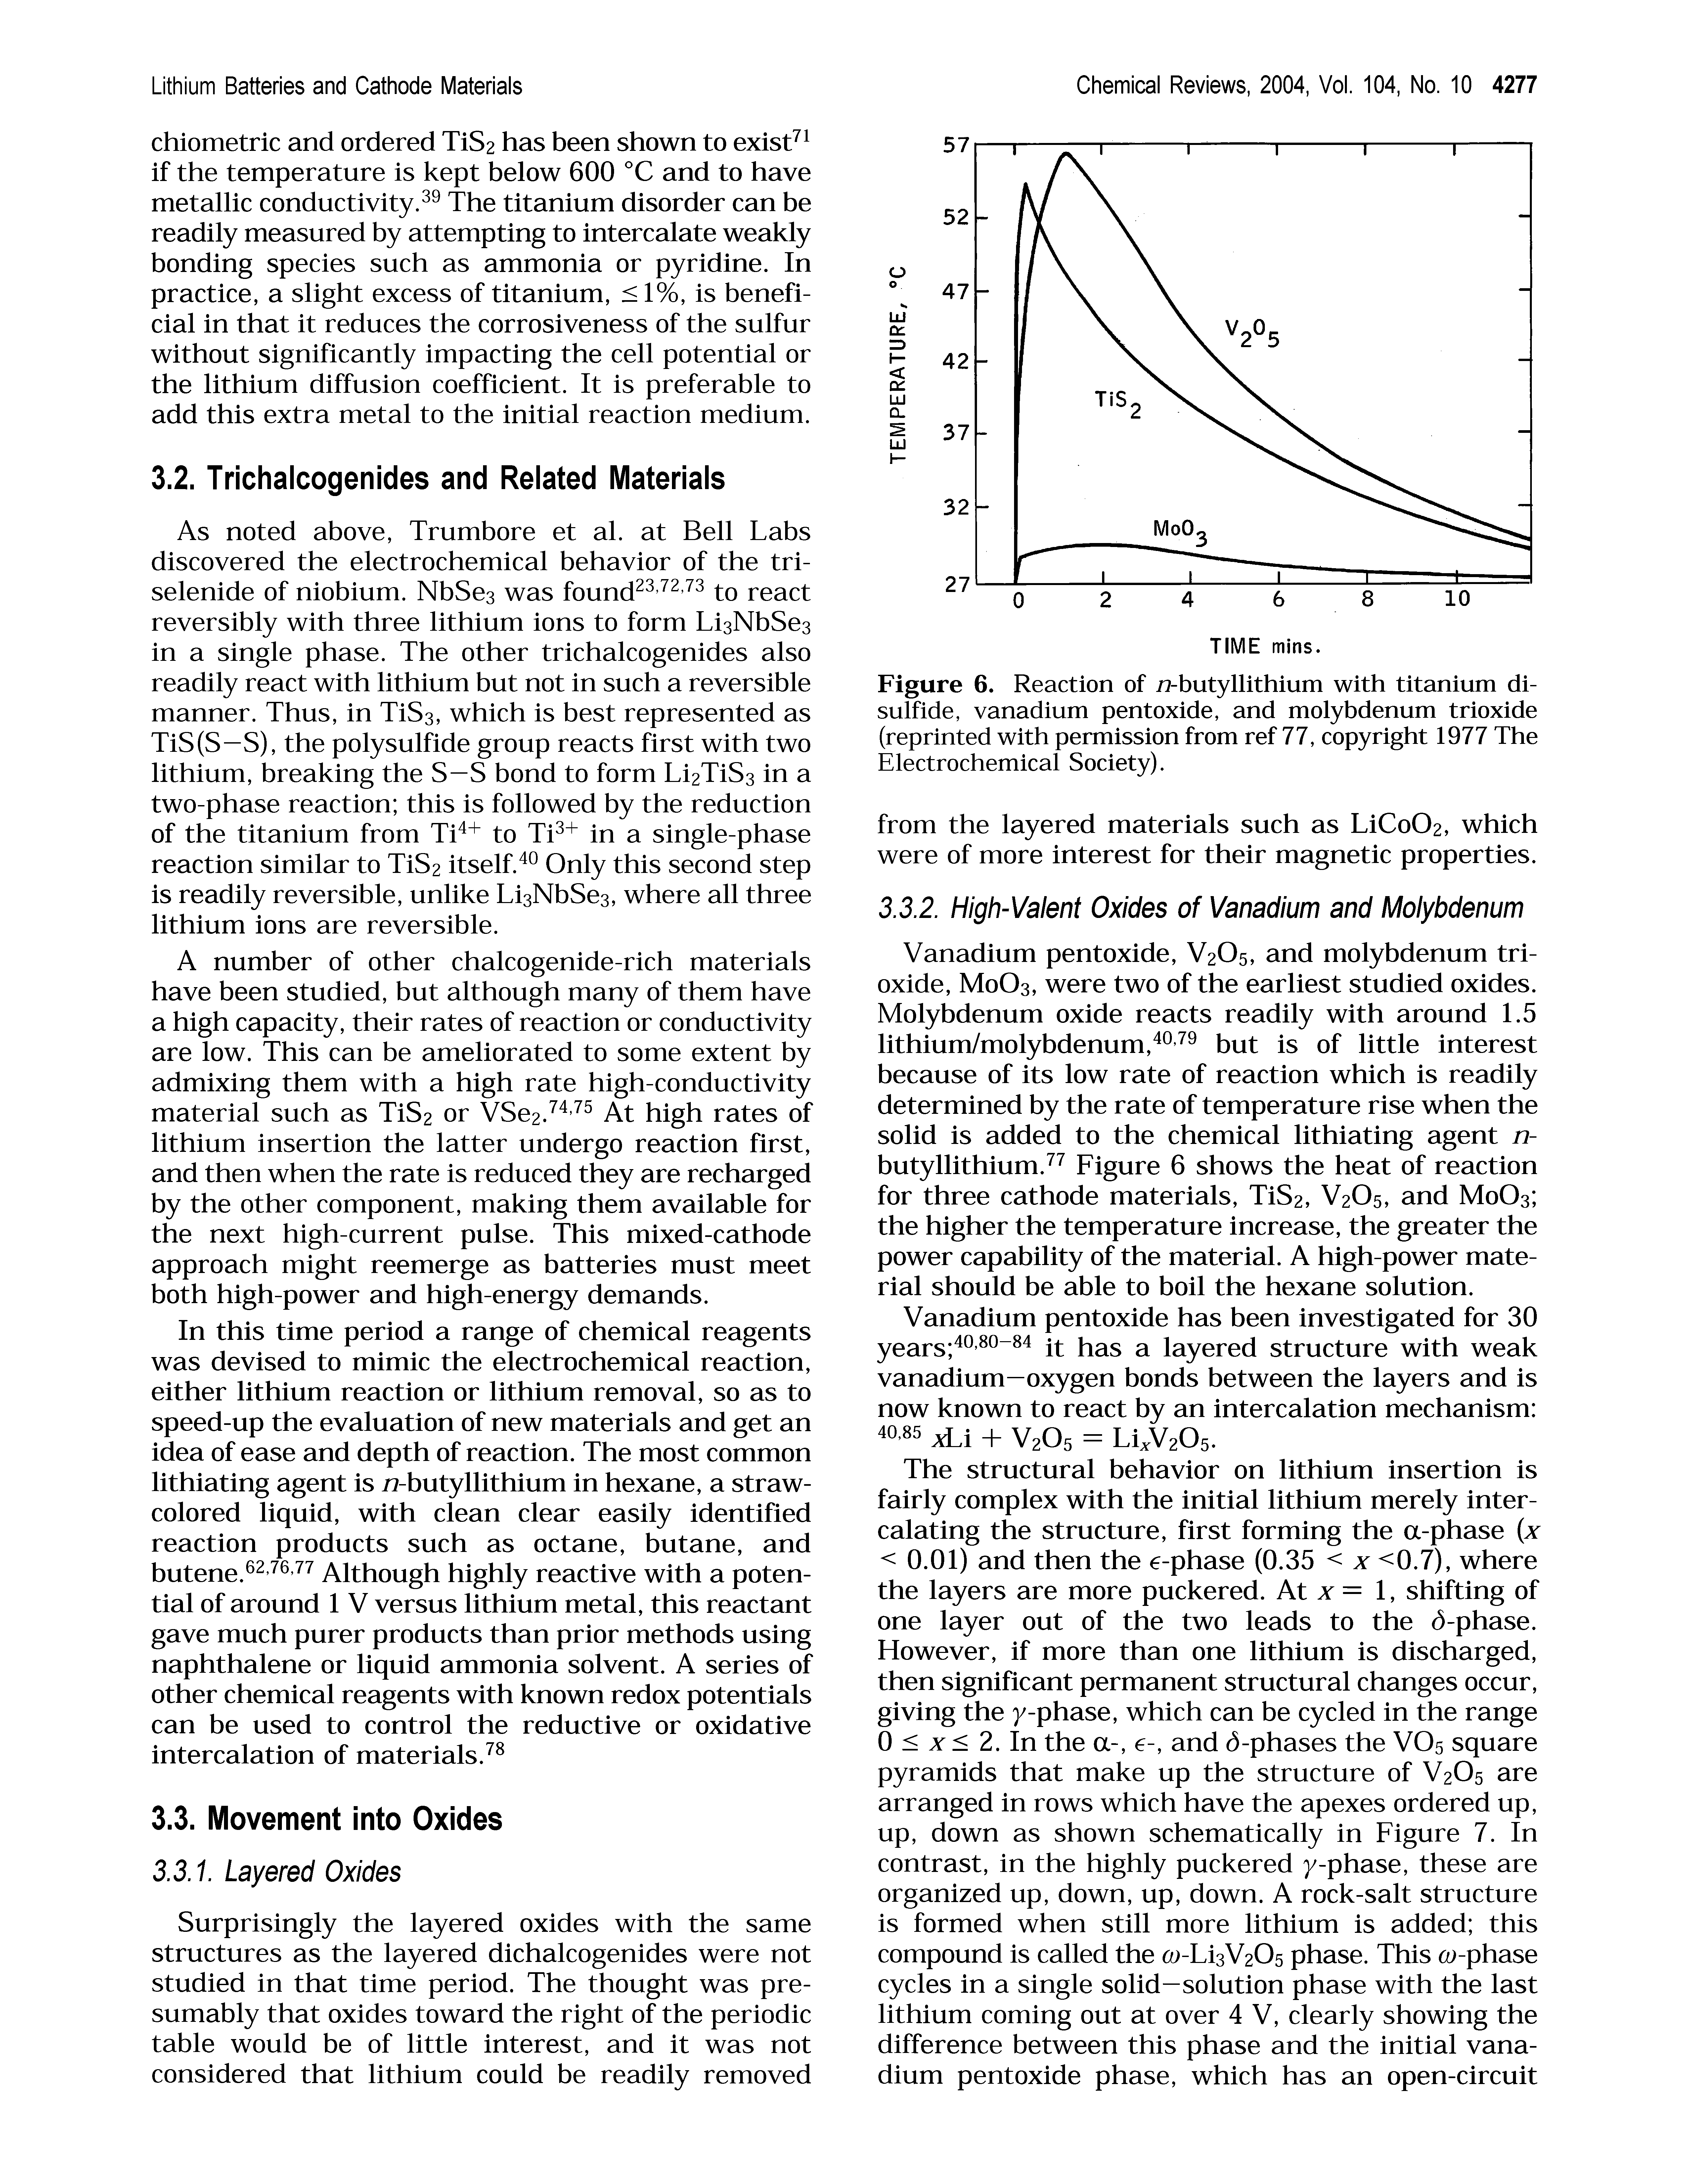 Figure 6. Reaction of n-butyllithium with titanium disulfide, vanadium pent oxide, and molybdenum trioxide (reprinted with permission from ref 77, copyright 1977 The Electrochemical Society).